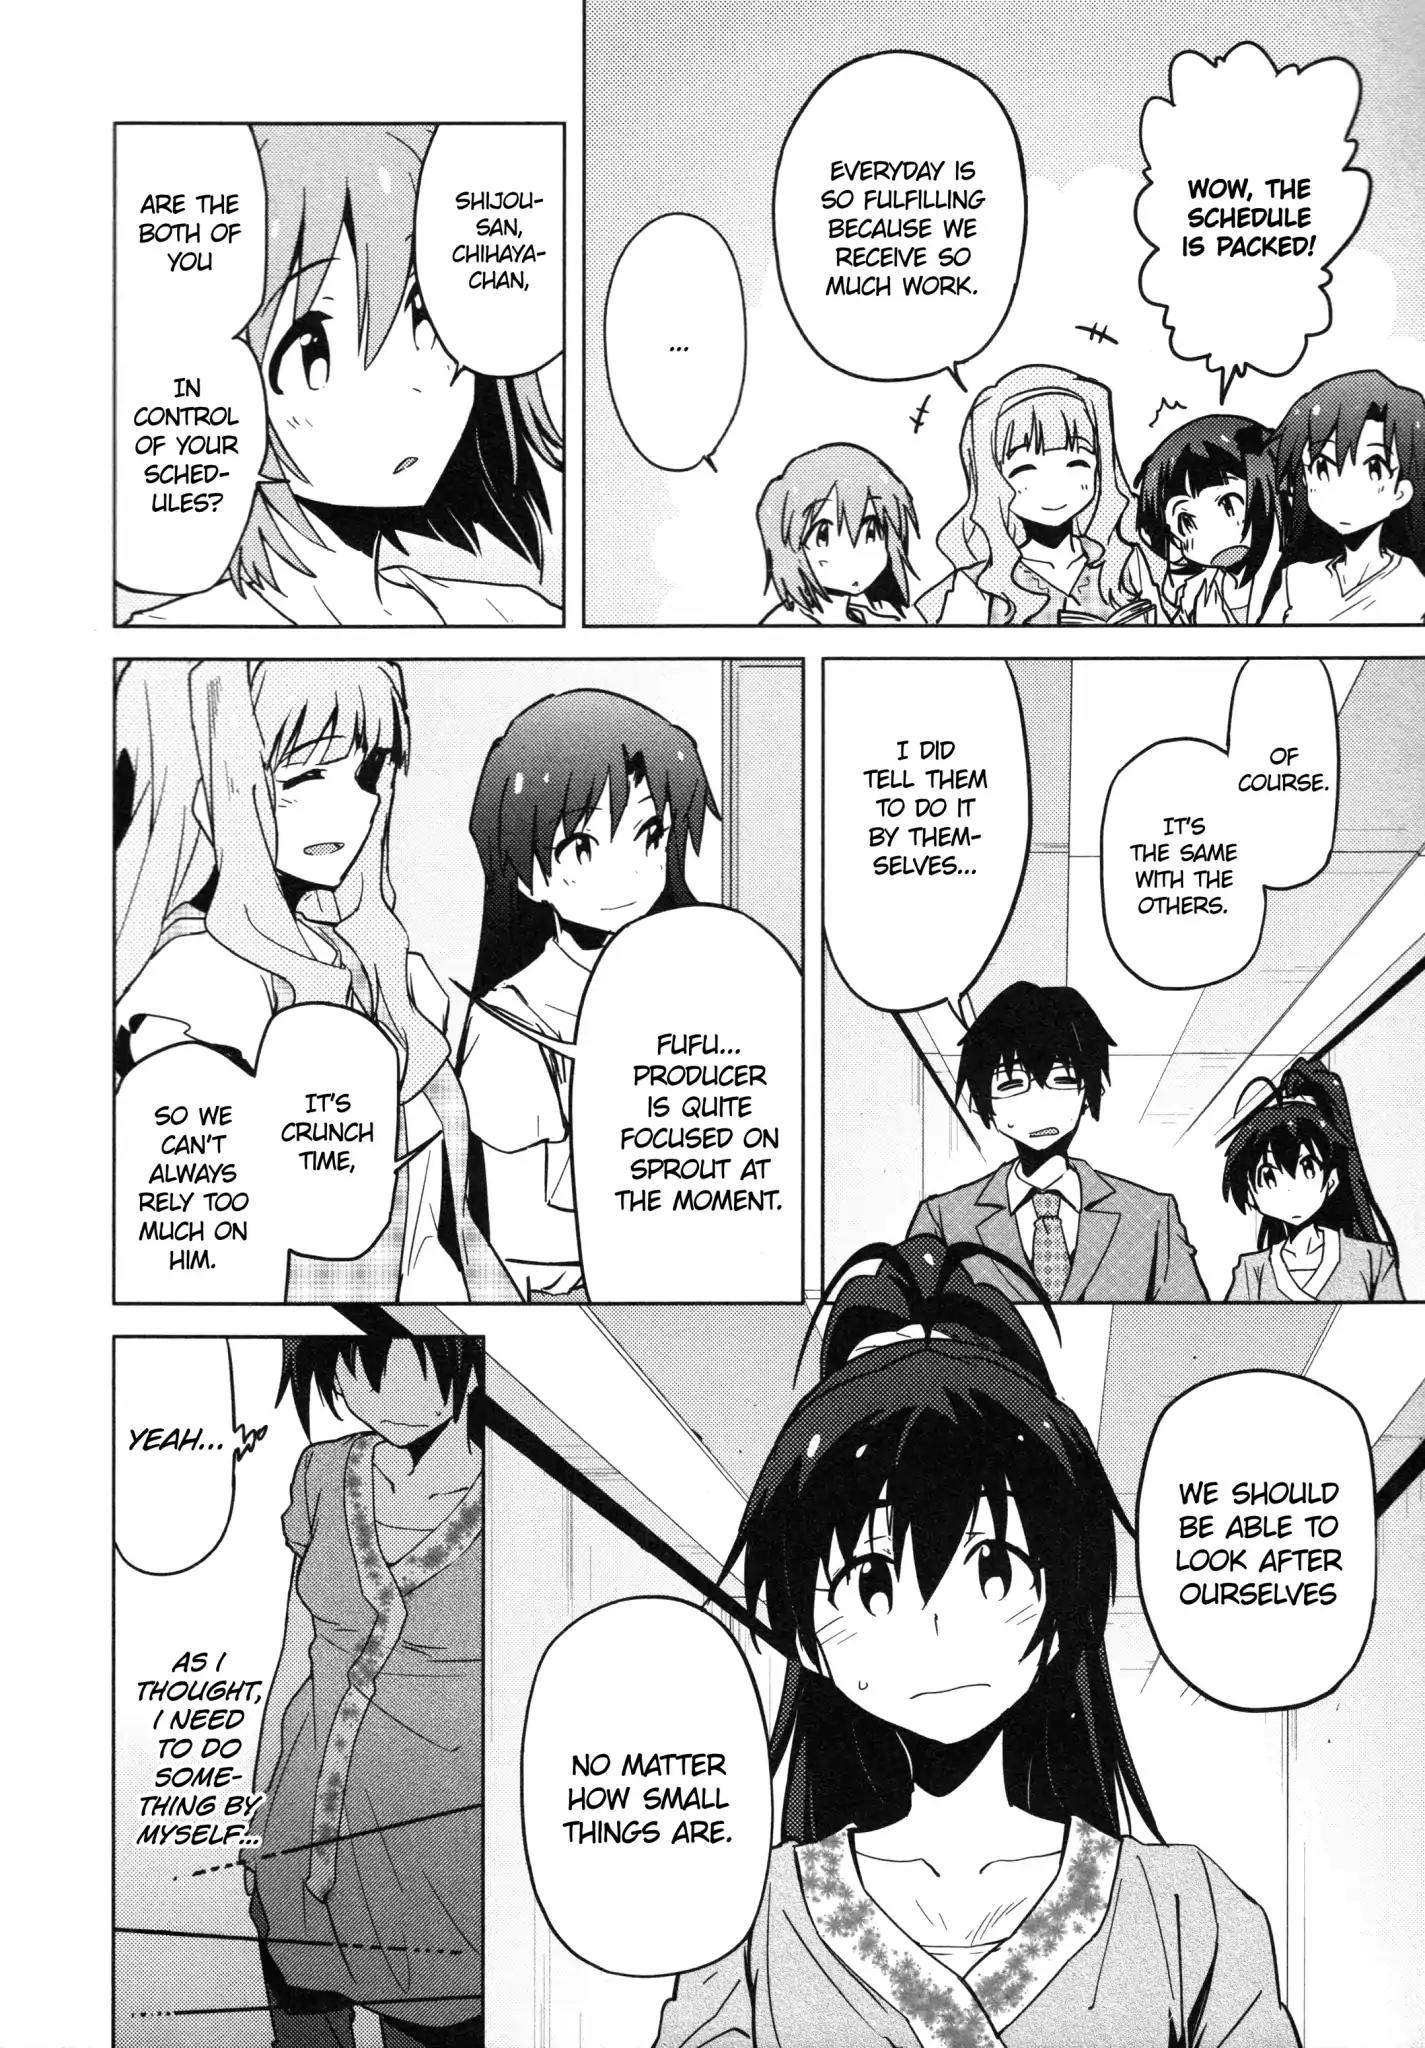 The iDOLM@STER 2: The World Is All One!! Vol.5 Chapter 29: Found It